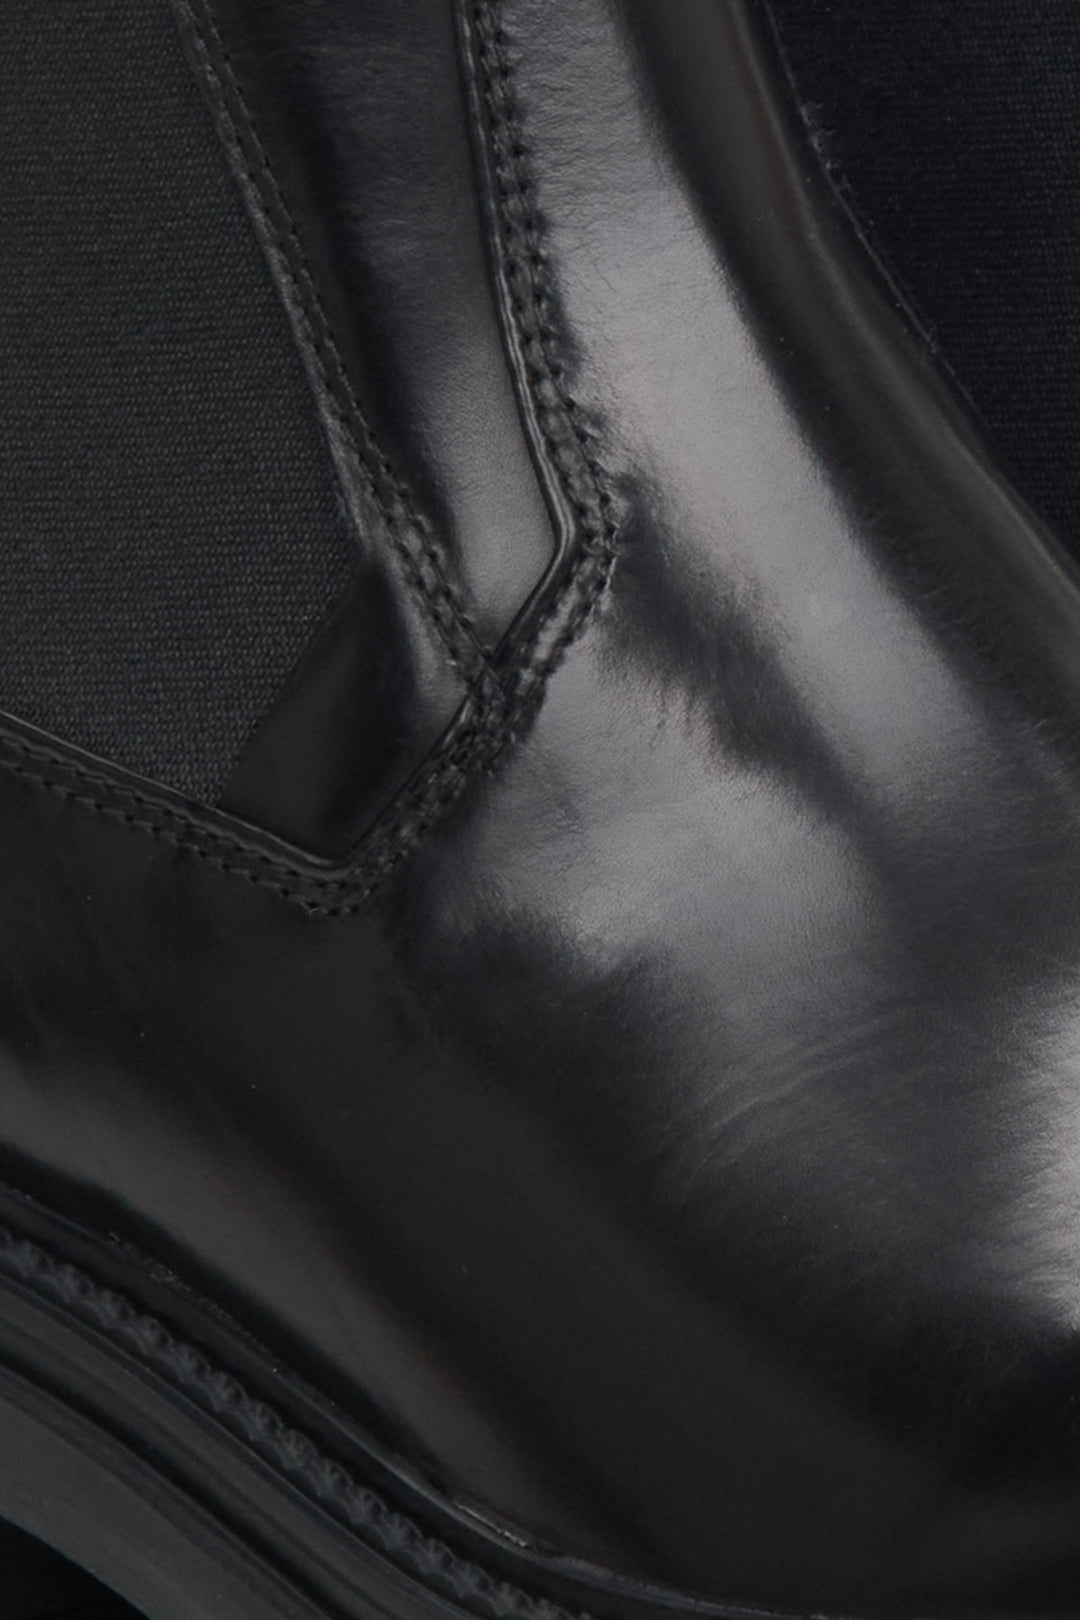 Women's black leather Chelsea boots - a close-up on details.